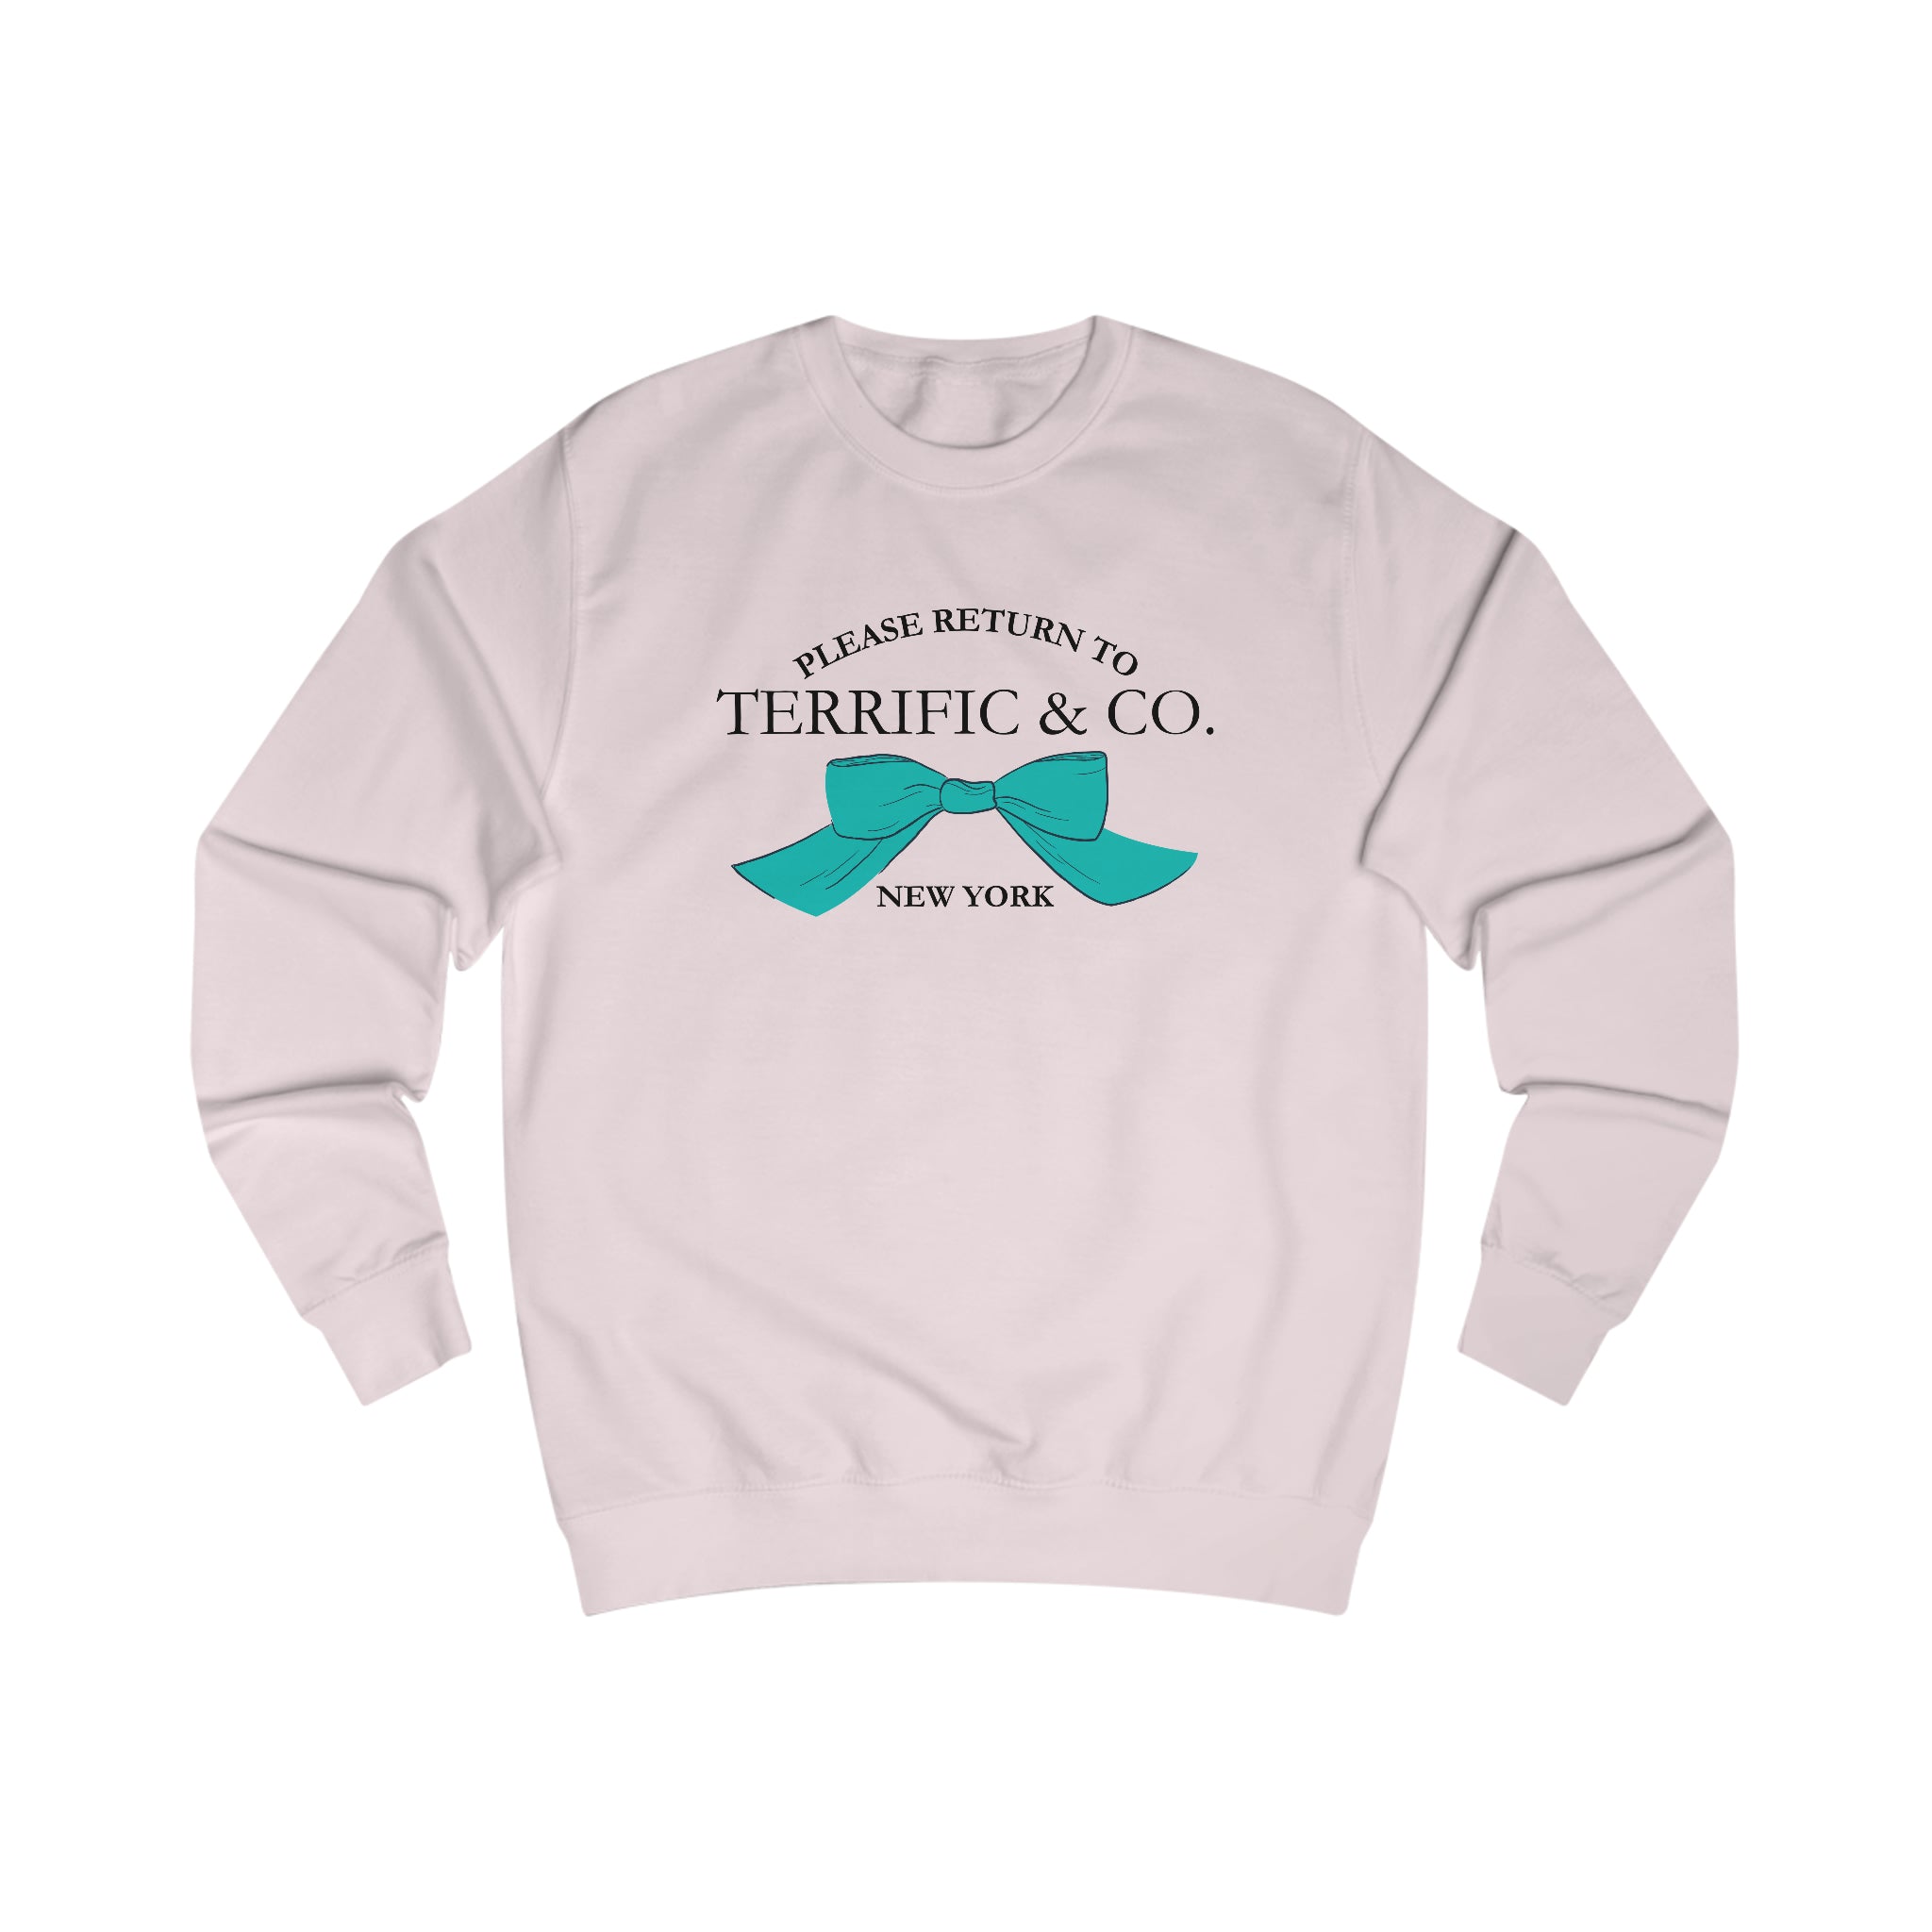 Please Return To Terrific and Co. (Bow) Designer inspired Relaxed Fit Unisex Sweatshirt Sweatshirt Baby-Pink-2XL The Middle Aged Groove